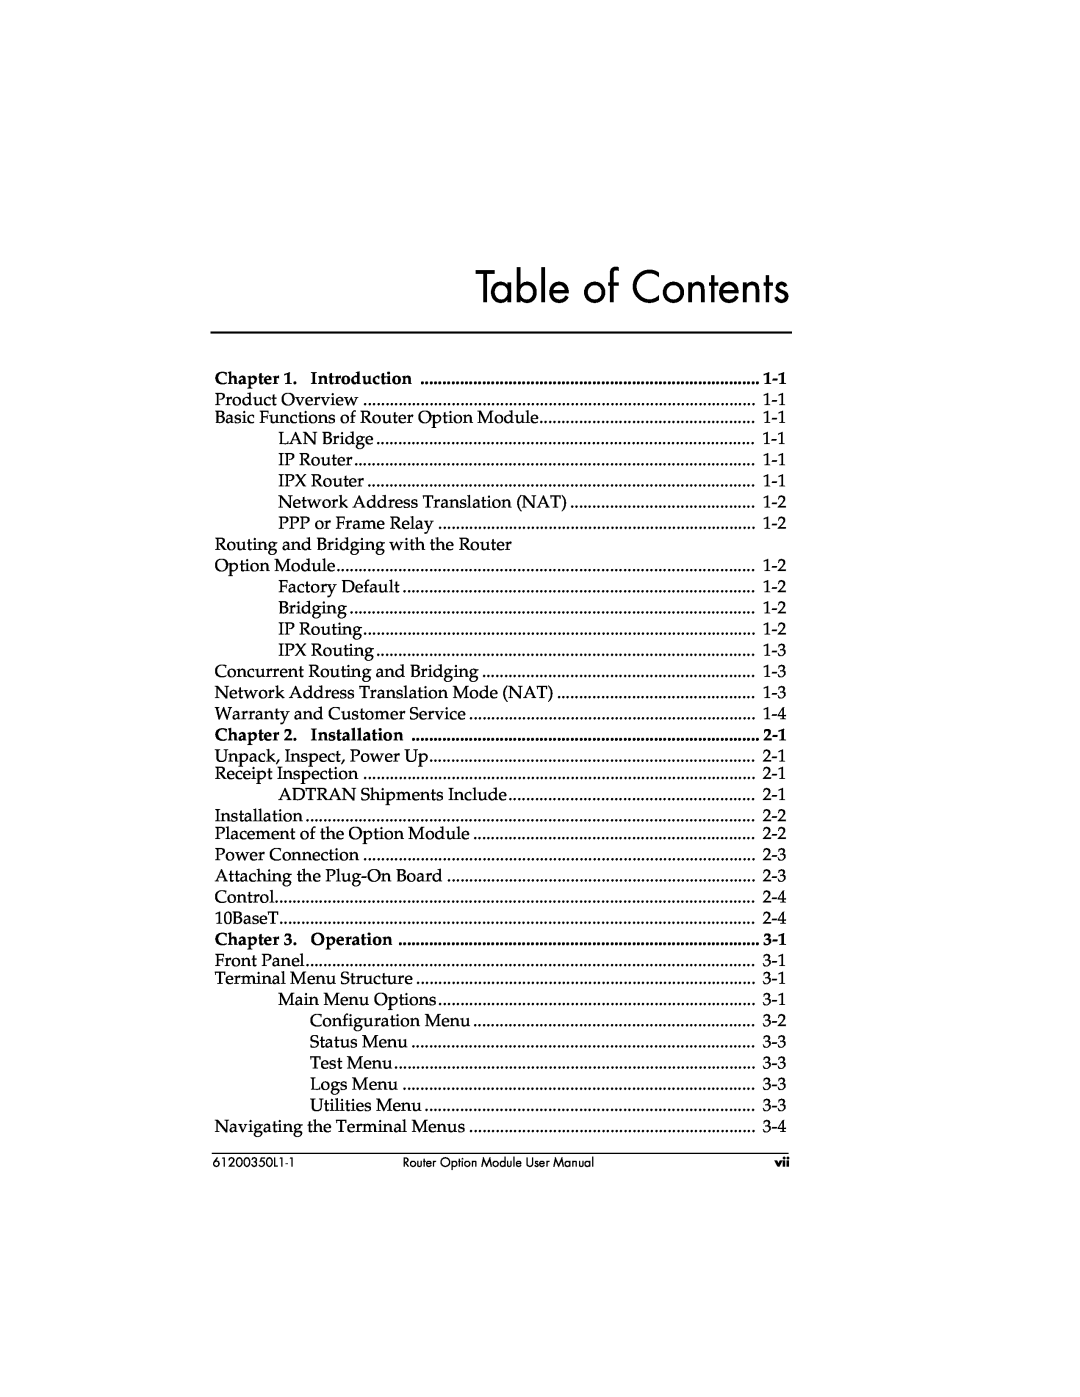 ADTRAN 1200350L1 user manual Table of Contents, Introduction, Installation, Operation 